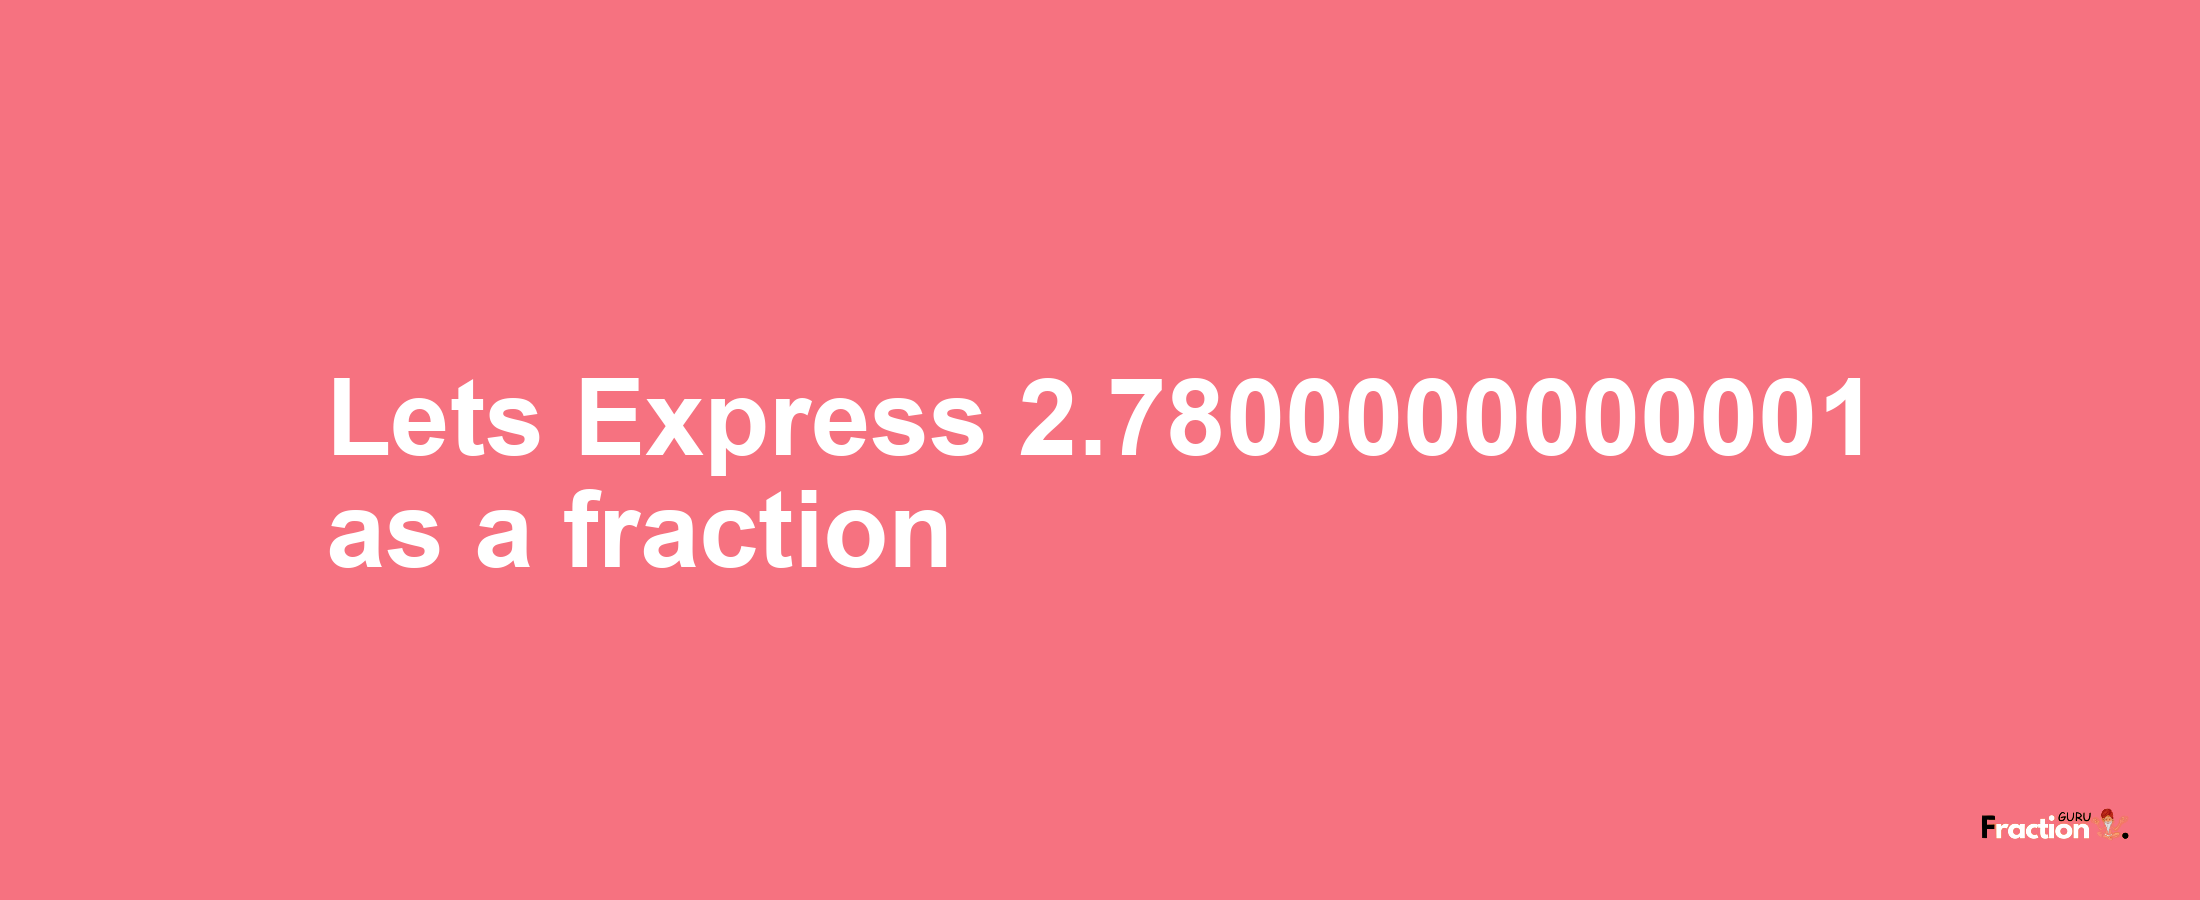 Lets Express 2.7800000000001 as afraction